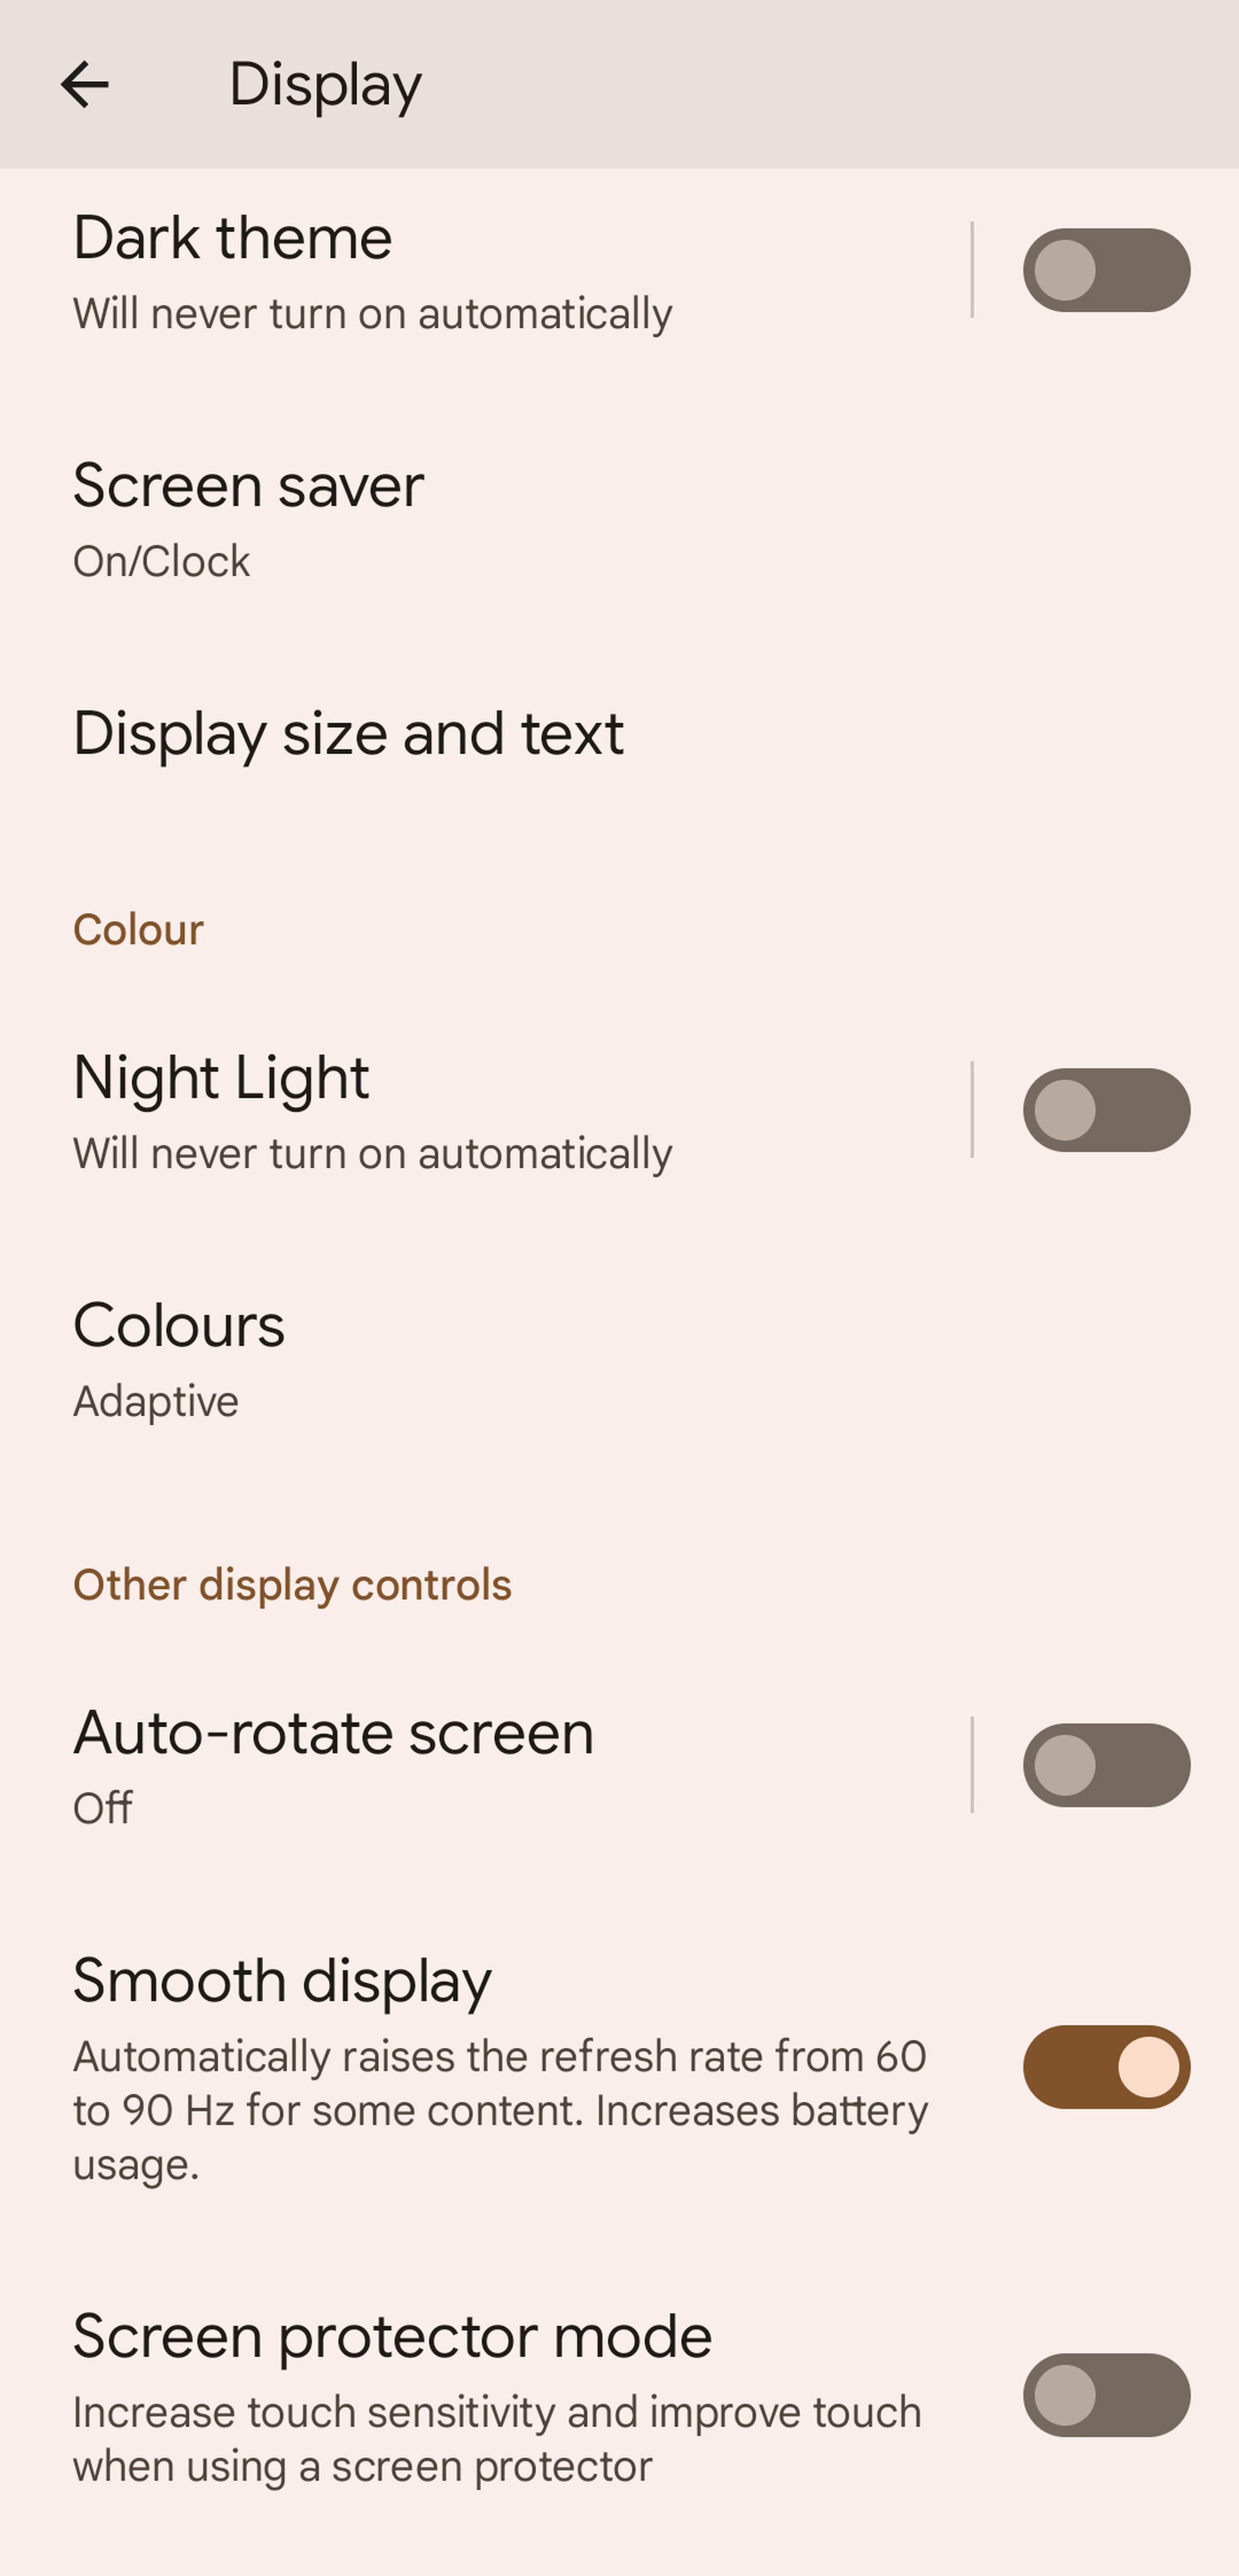 Display settings screen with a list of options, including Smooth display.